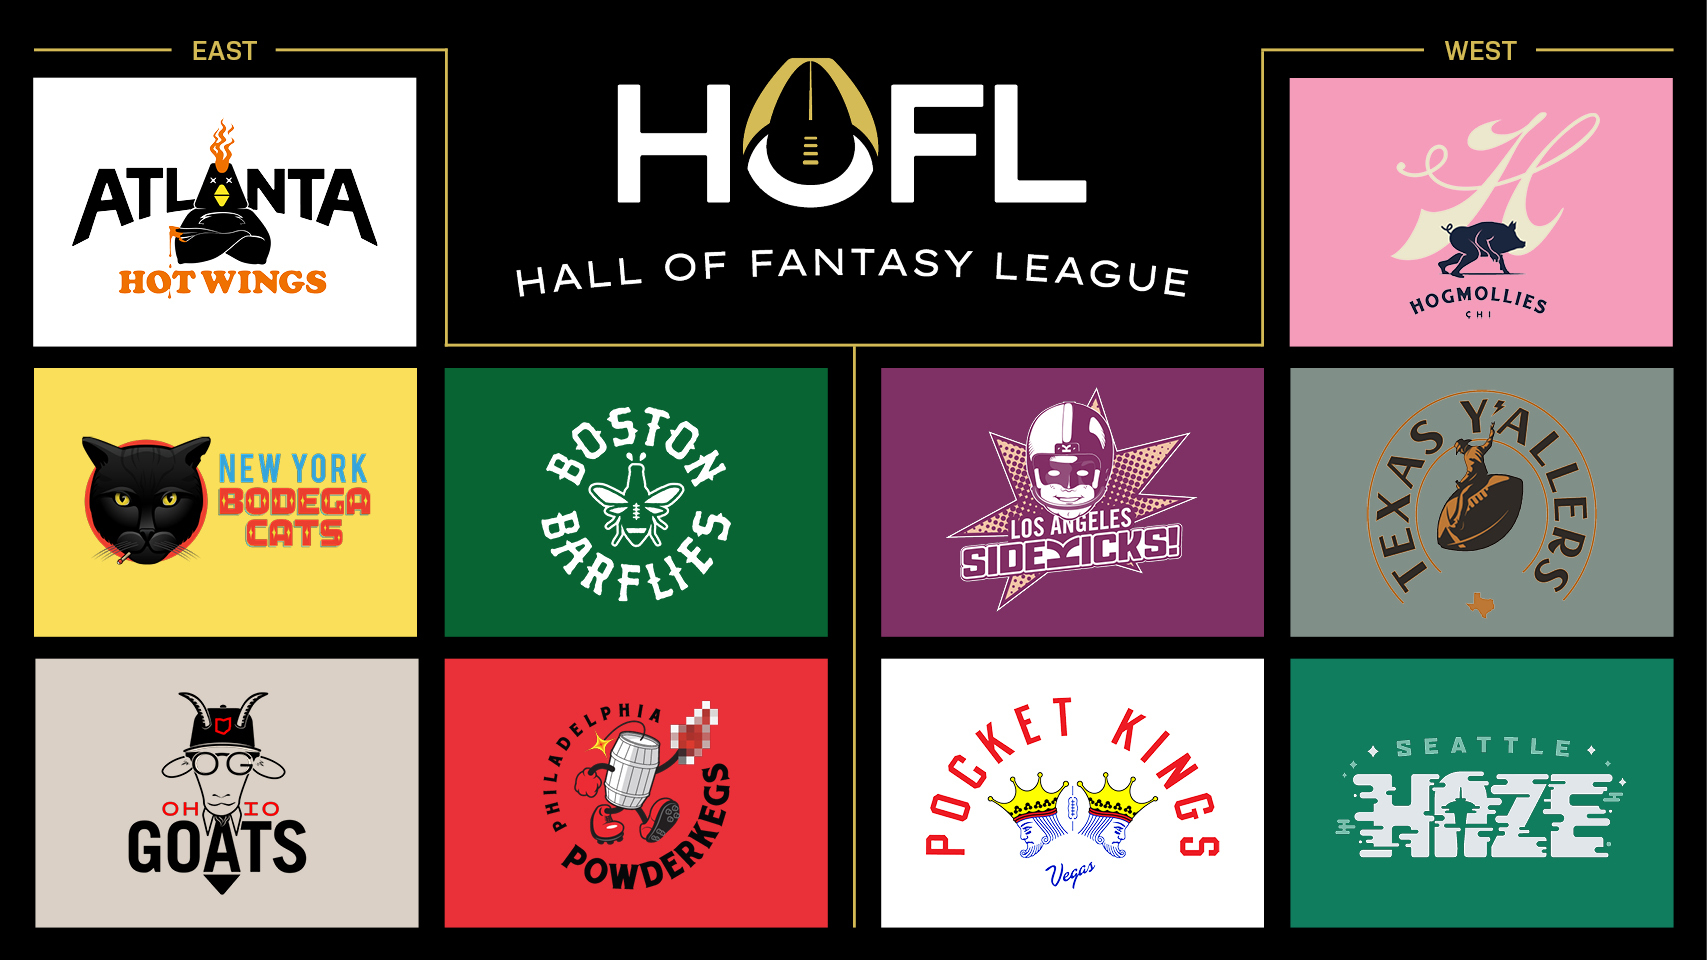 The Hall of Fame Resort & Entertainment Company unveiled the 10 franchises that will comprise its fantasy league - the Hall Of Fantasy League.